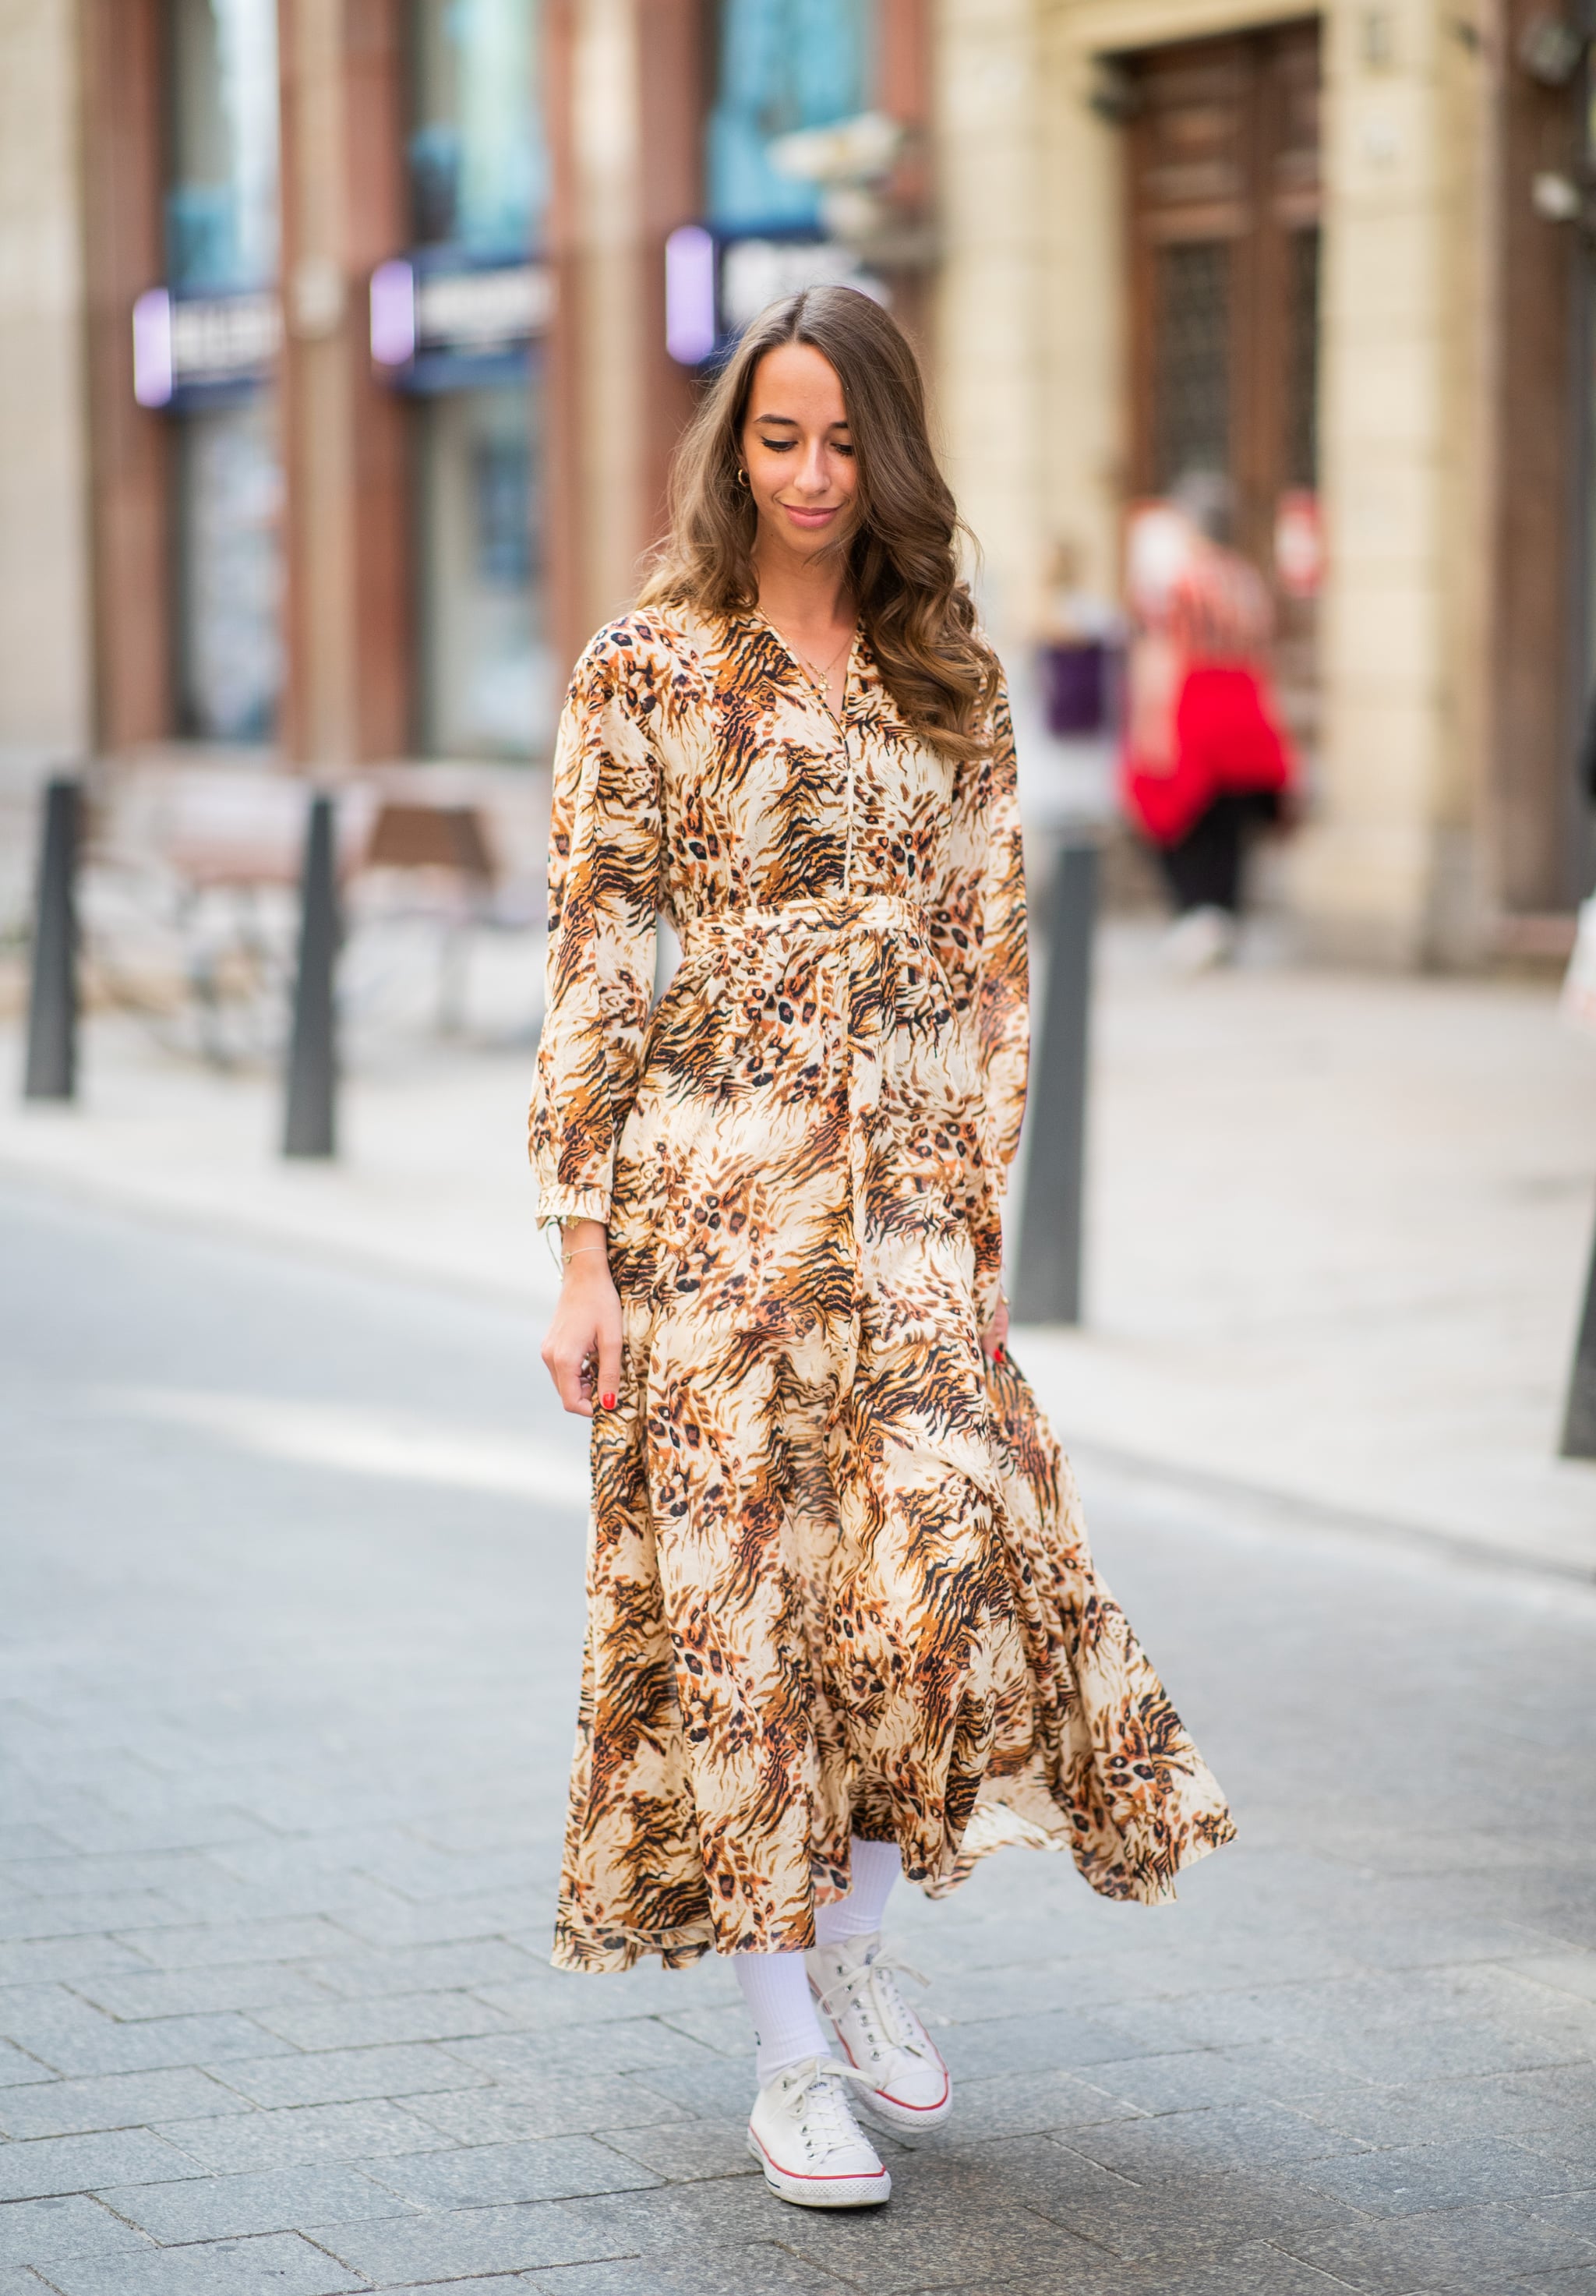 long dress with converse shoes